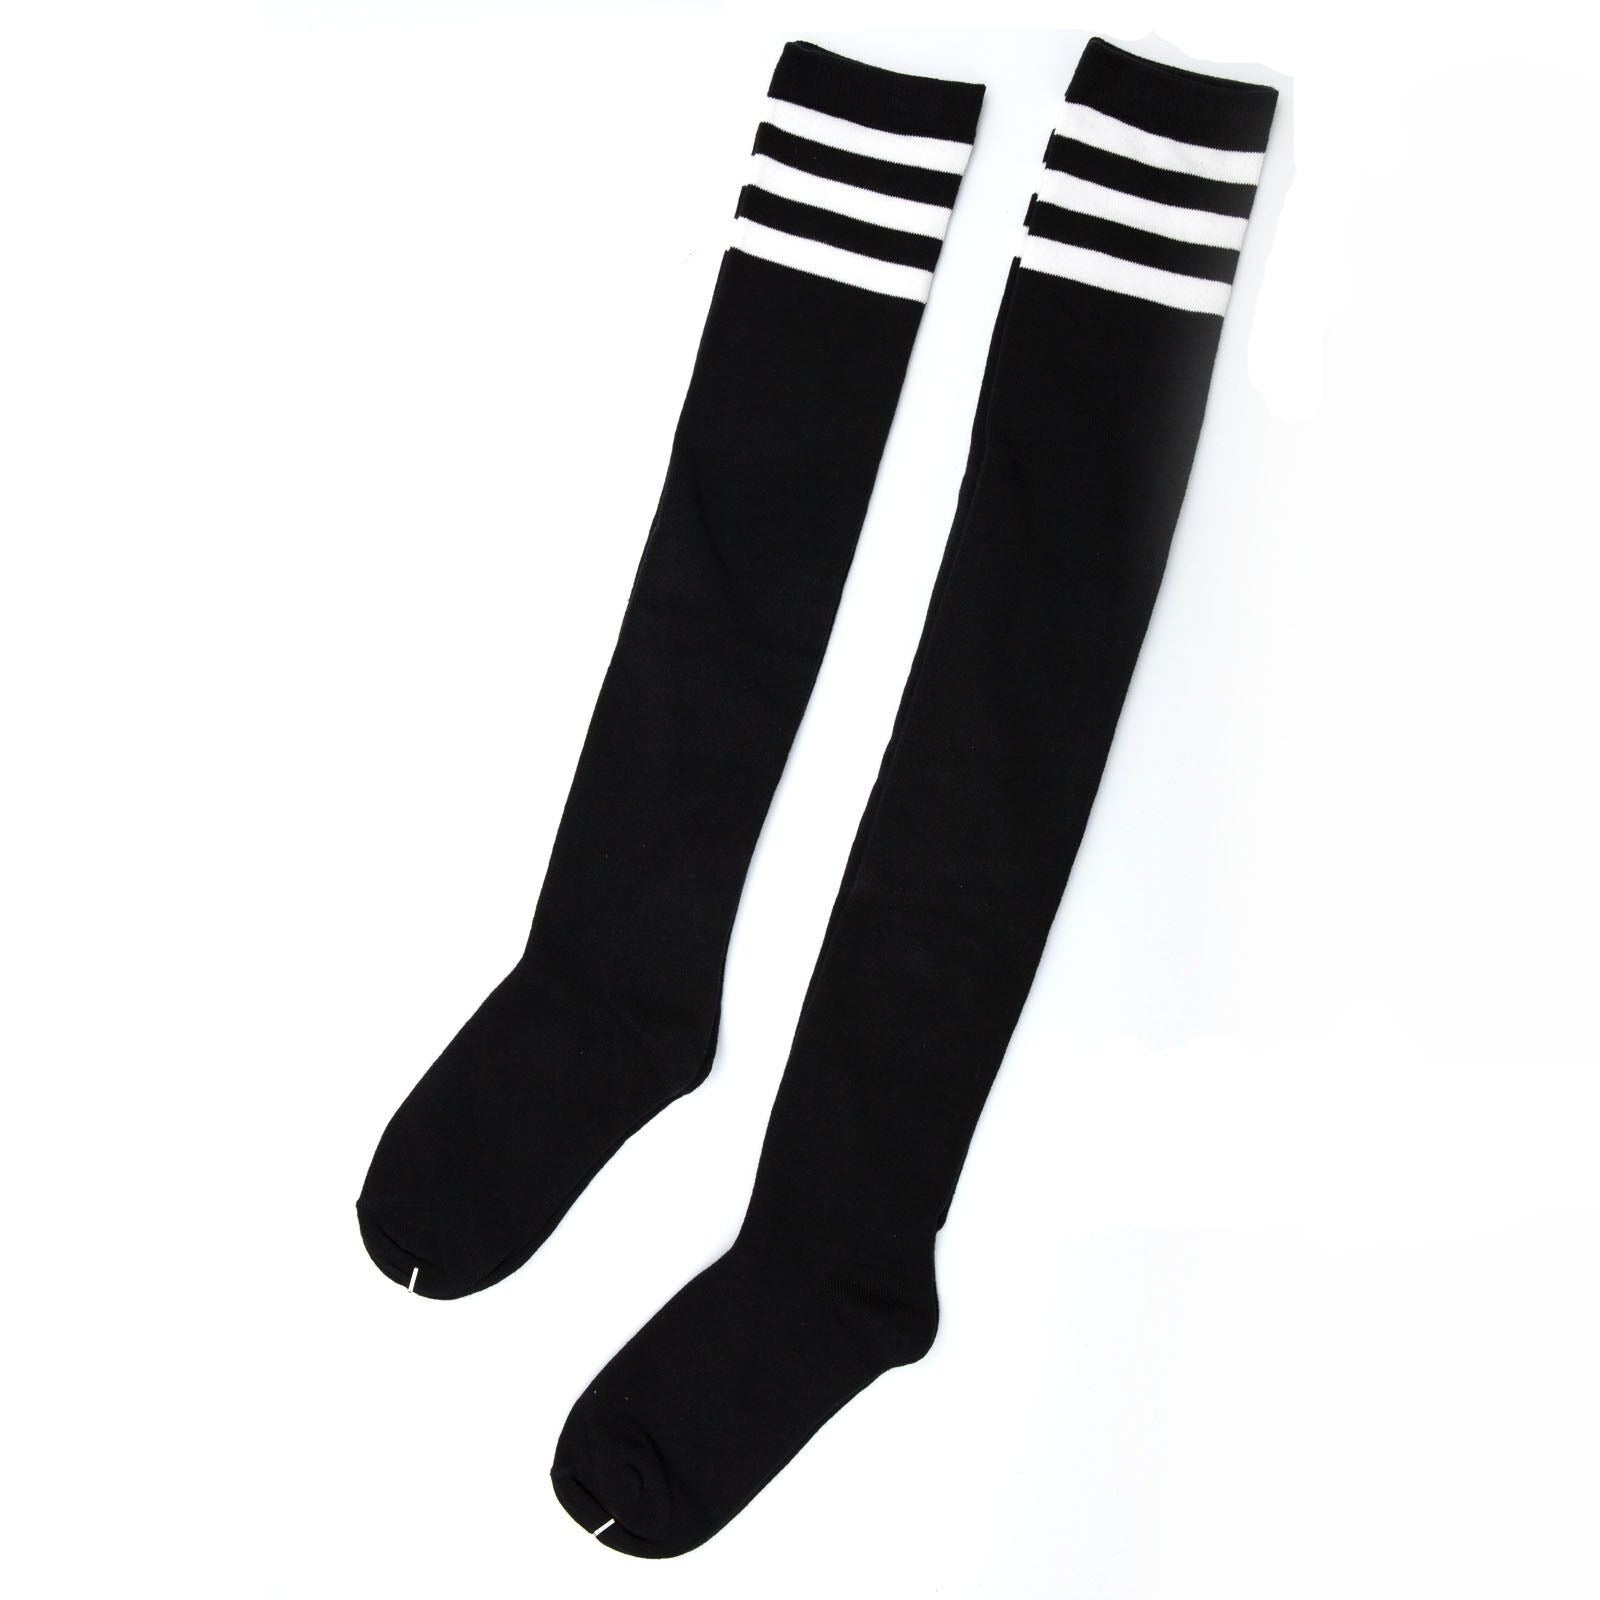 Womens Striped Top Black White Cotton Knee High Socks Over the Knee Th ...